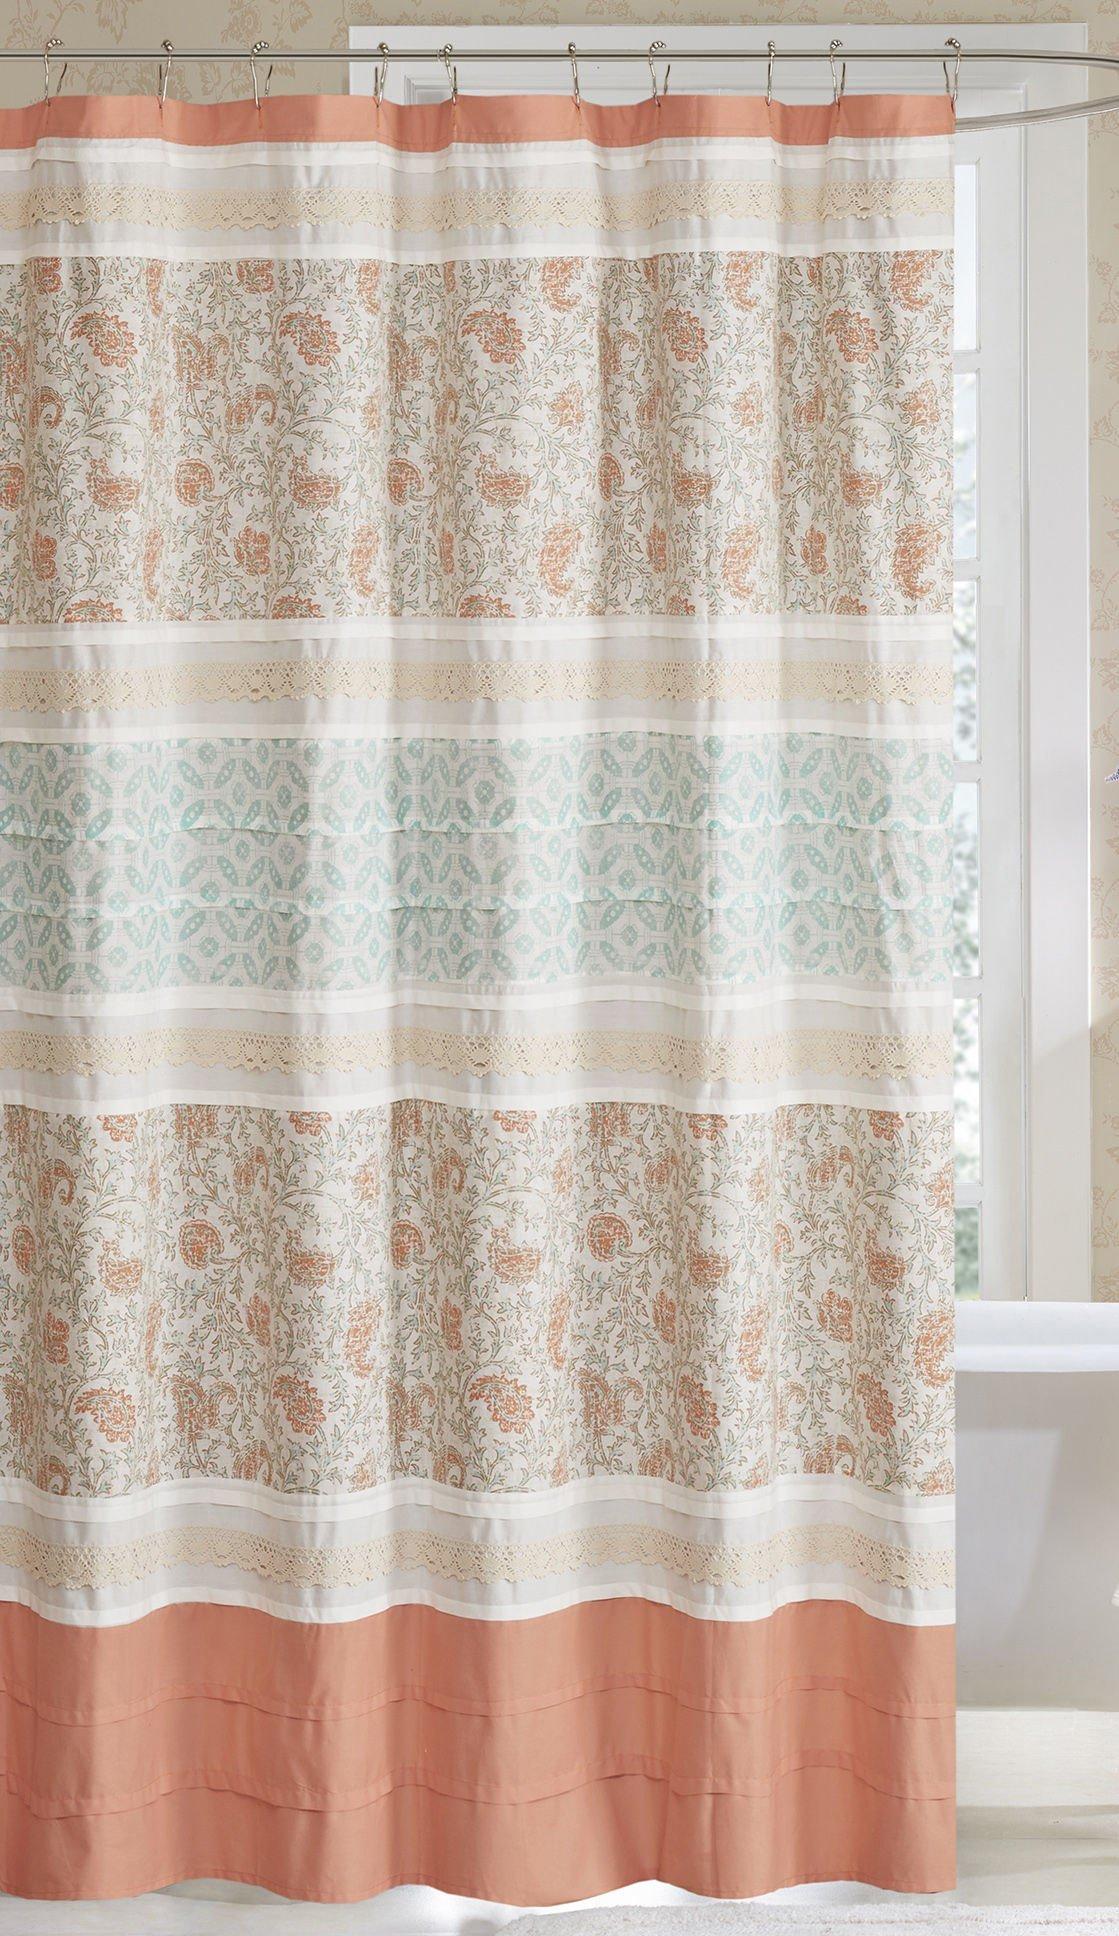 Photos - Other sanitary accessories Madison Park Dawn Shower Curtain